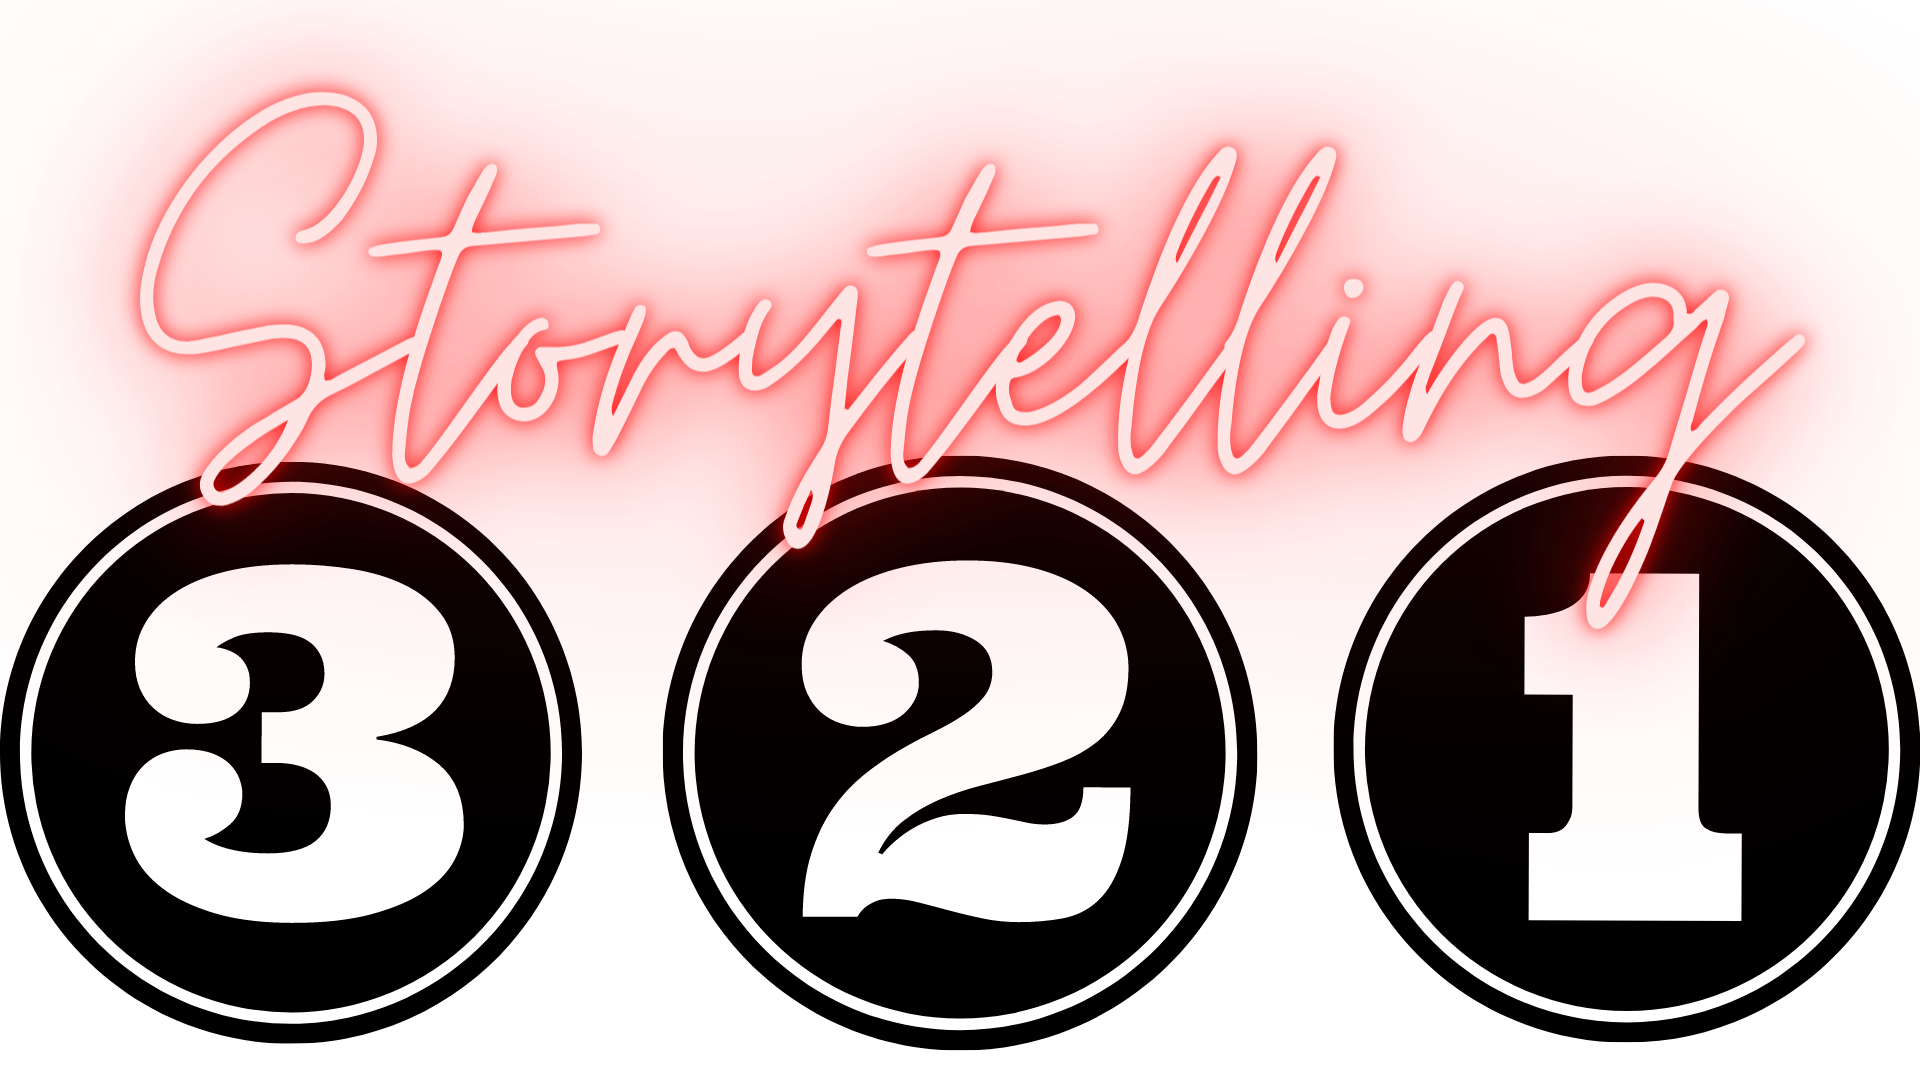 storytelling with numbers 3, 2, 1